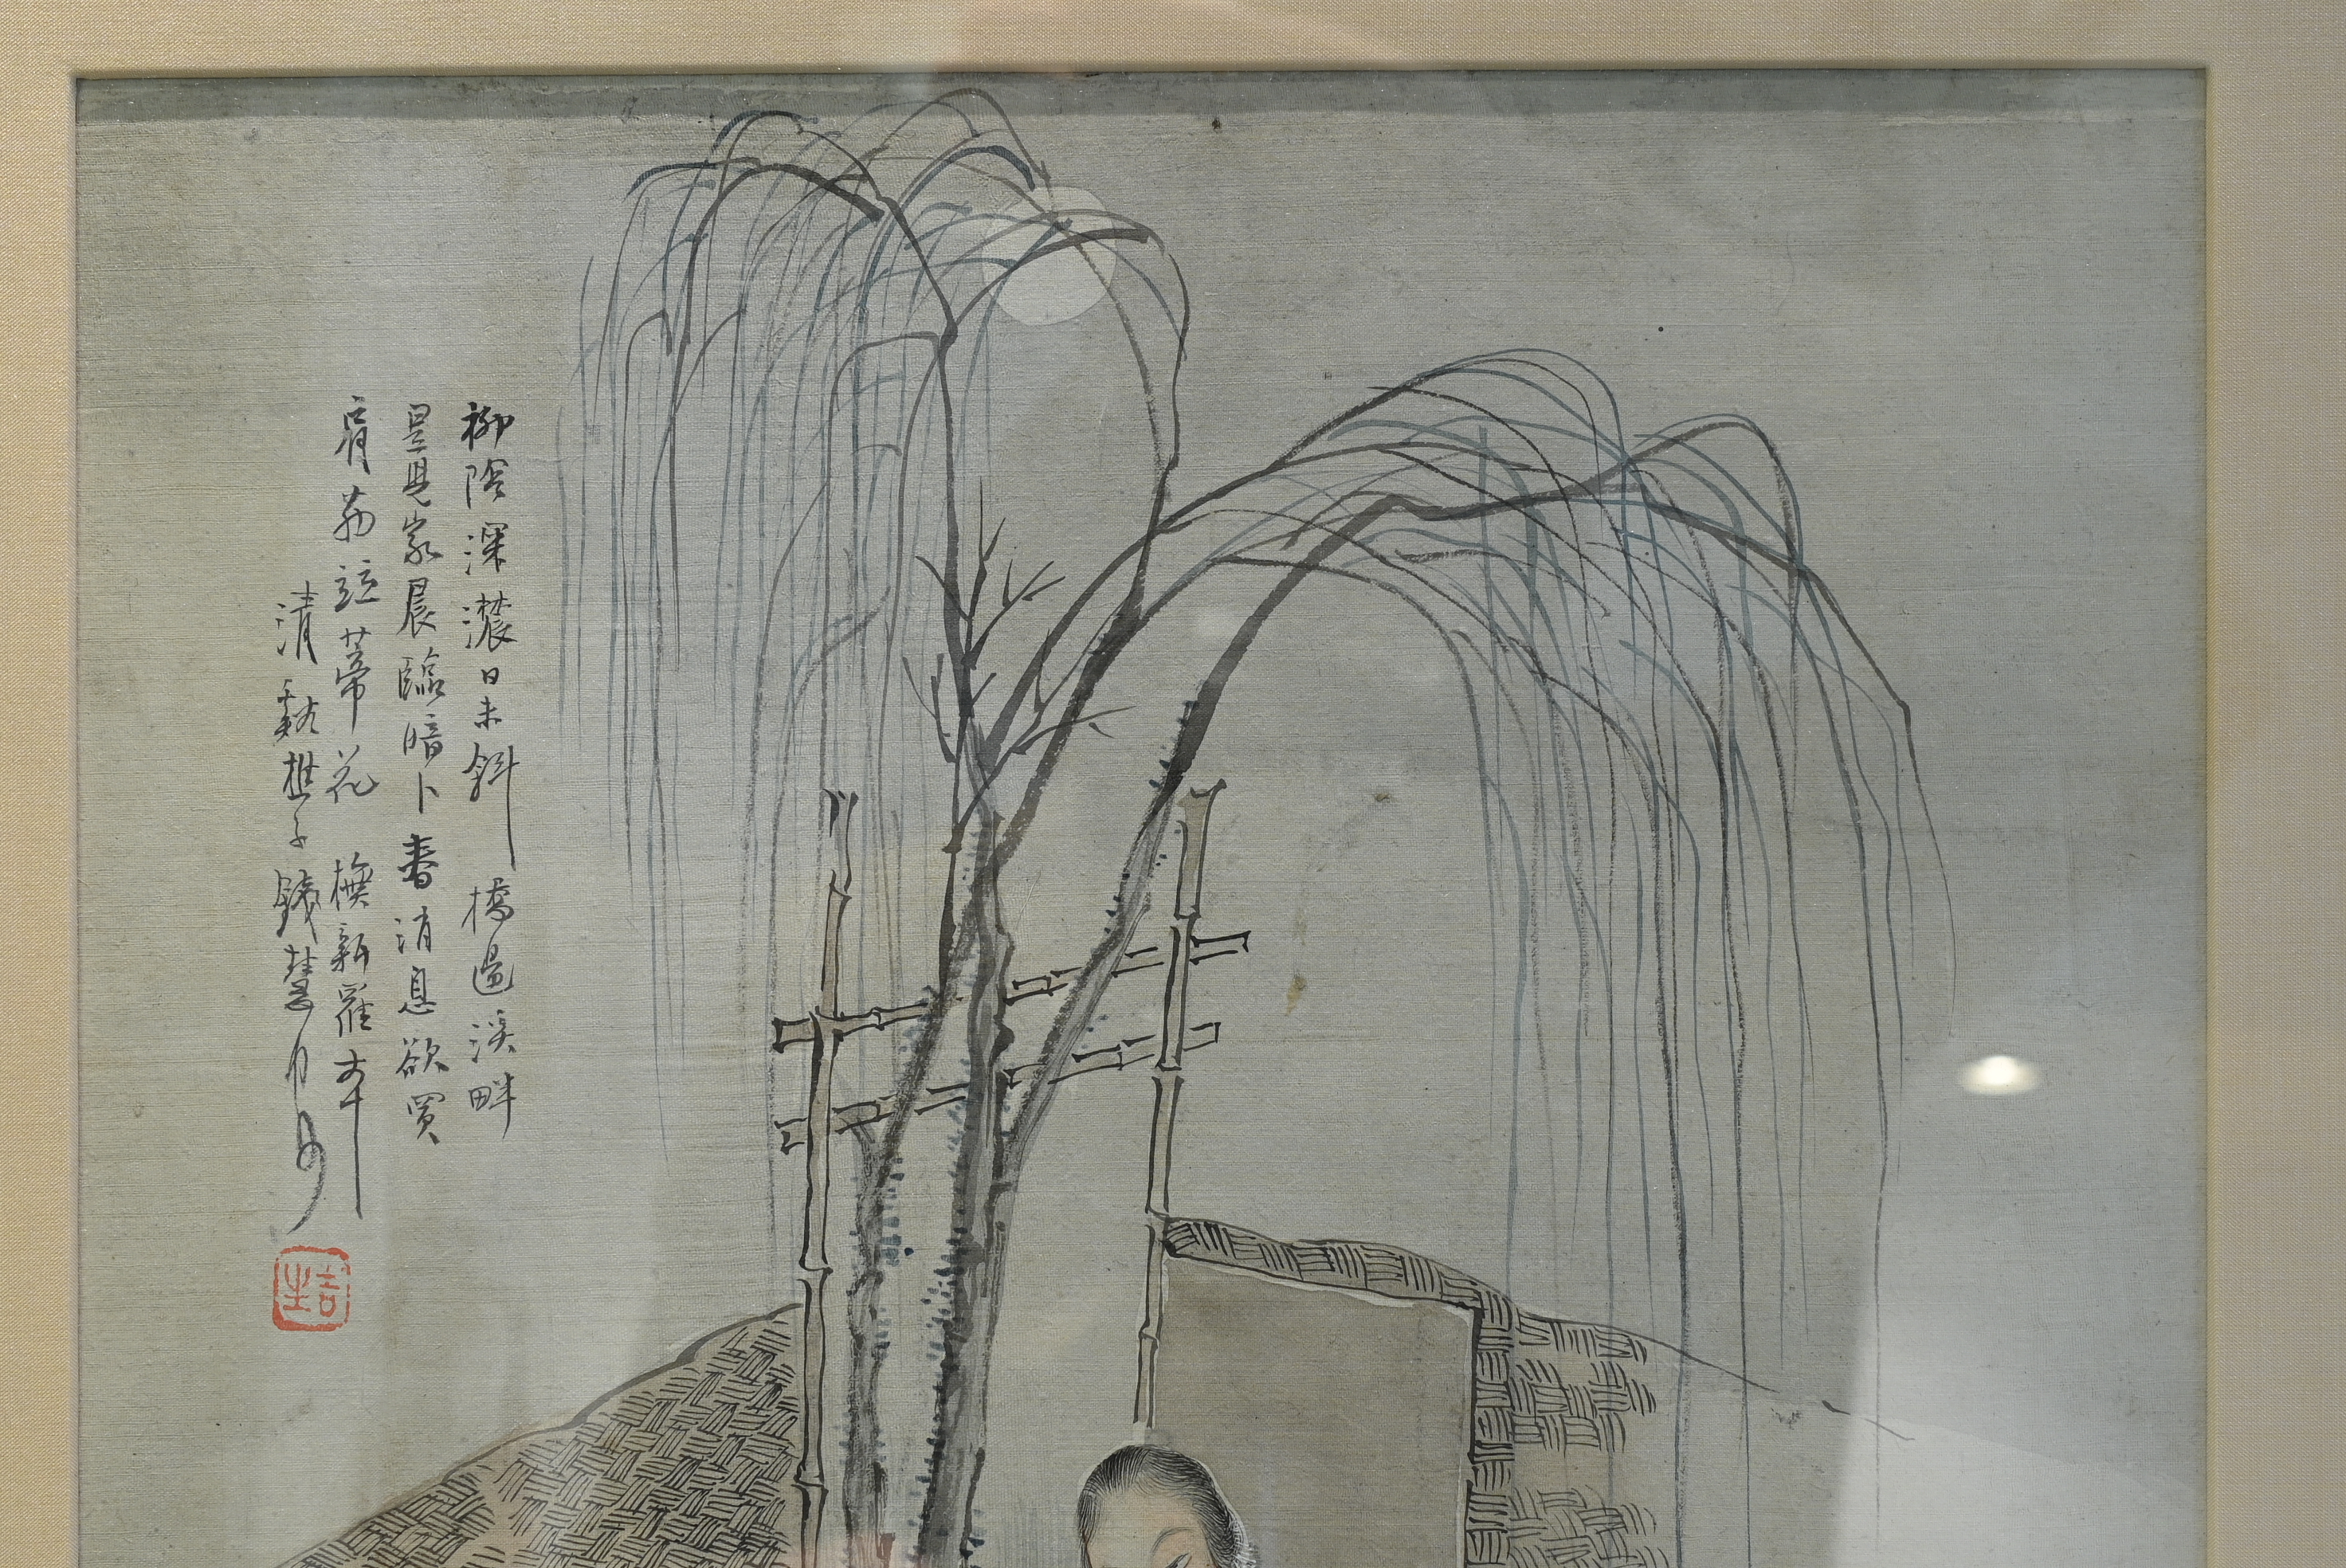 QIAN HUI'AN (1833-1911), QING DYNASTY. Chinese watercolour painting on silk depicting a lady in a - Image 11 of 14